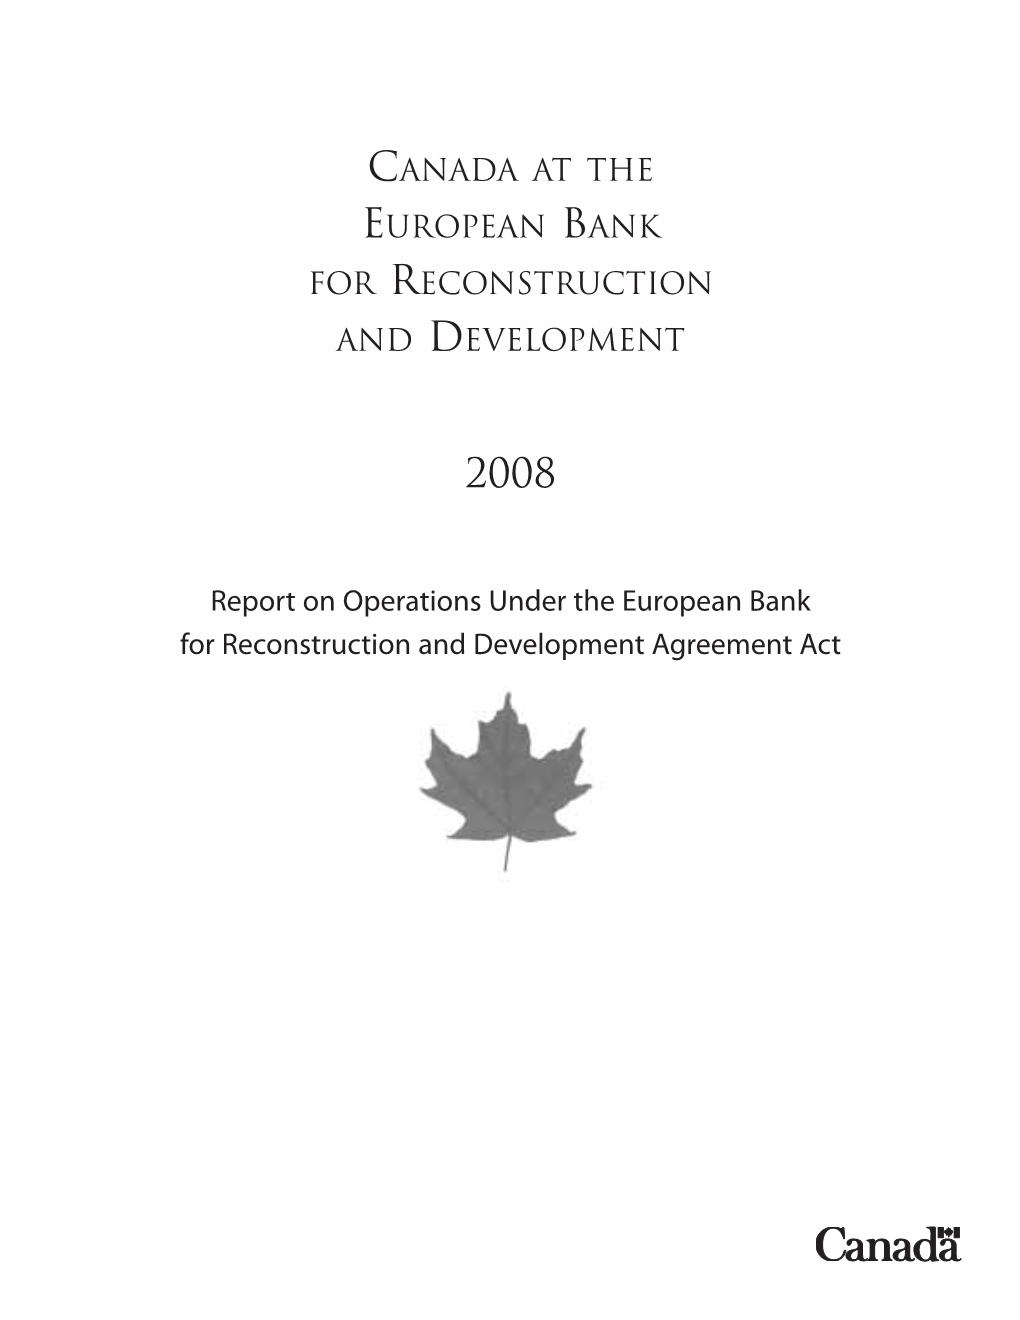 Canada at the European Bank for Reconstruction and Development